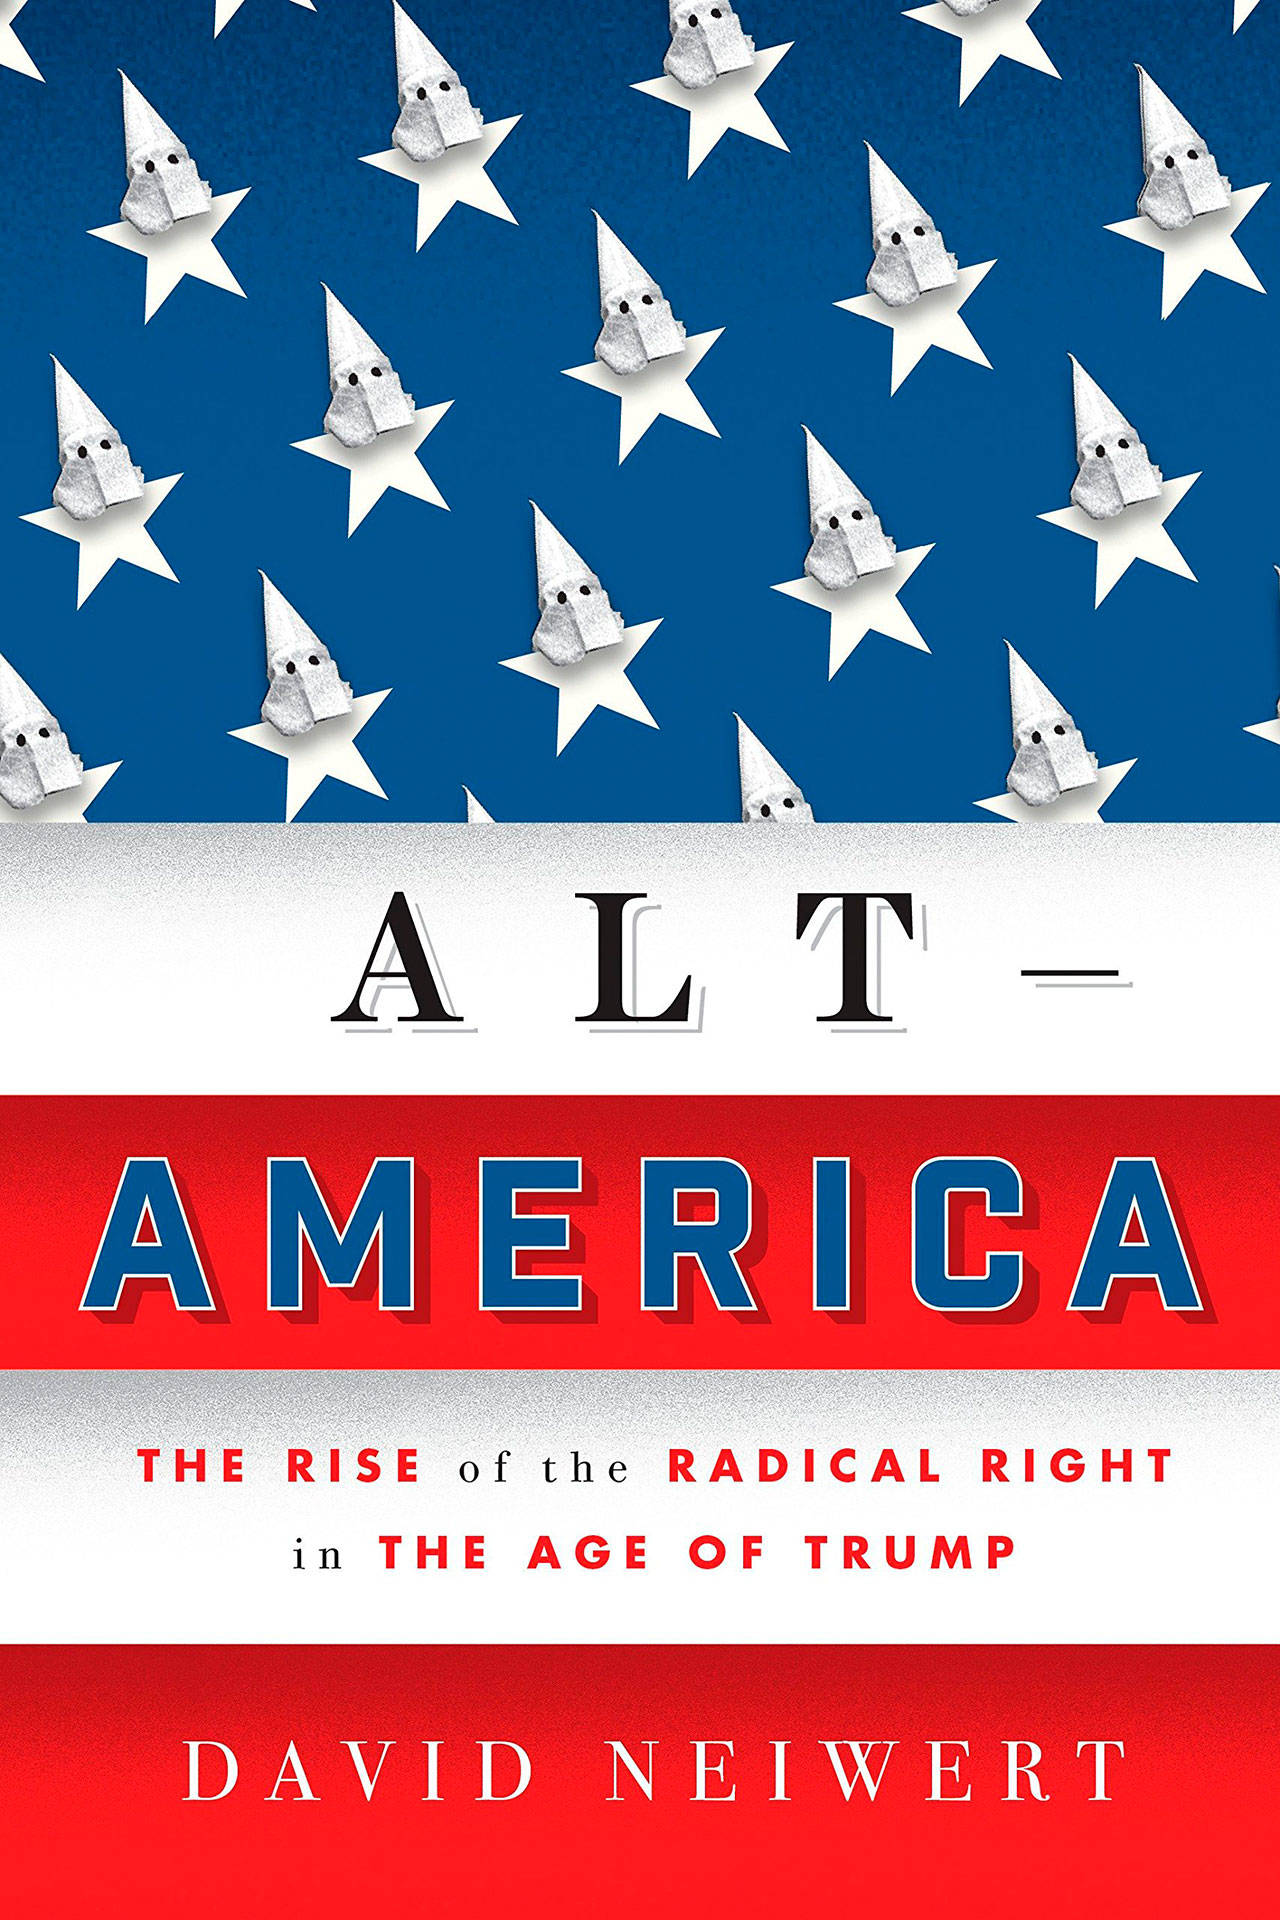 Image courtesy of Eagle Harbor Book Company | Dave Neiwart, an investigative journalist and author based in Seattle, will visit Eagle Harbor Book Company to discus his latest book “Alt-America: The Rise of the Radical Right in the Age of Trump” at 6:30 p.m. Thursday, June 13.